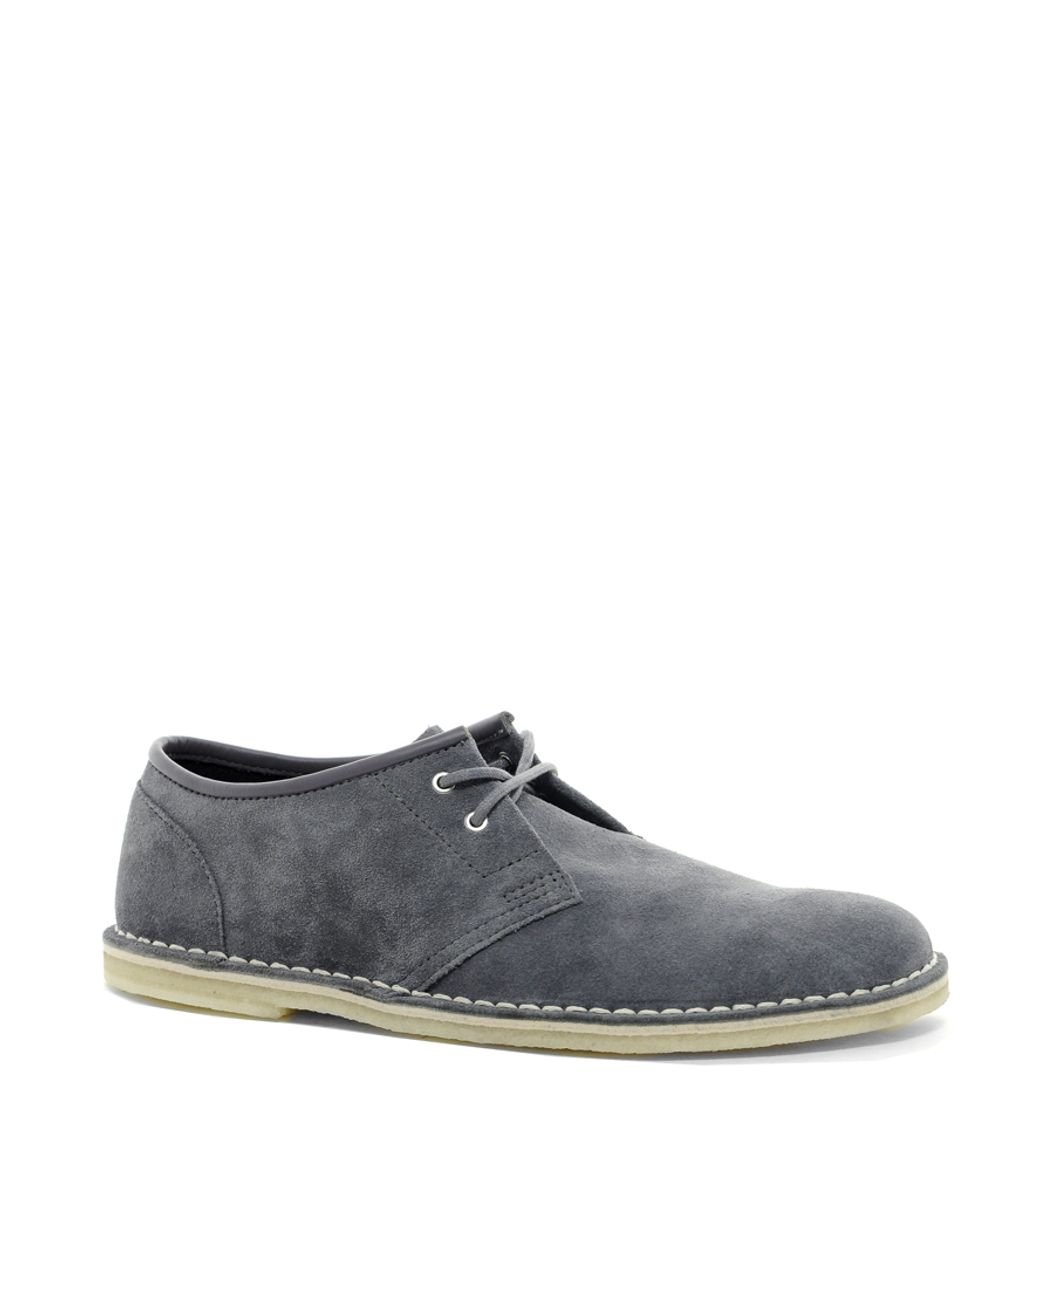 Clarks Jink Shoes in Gray for Lyst